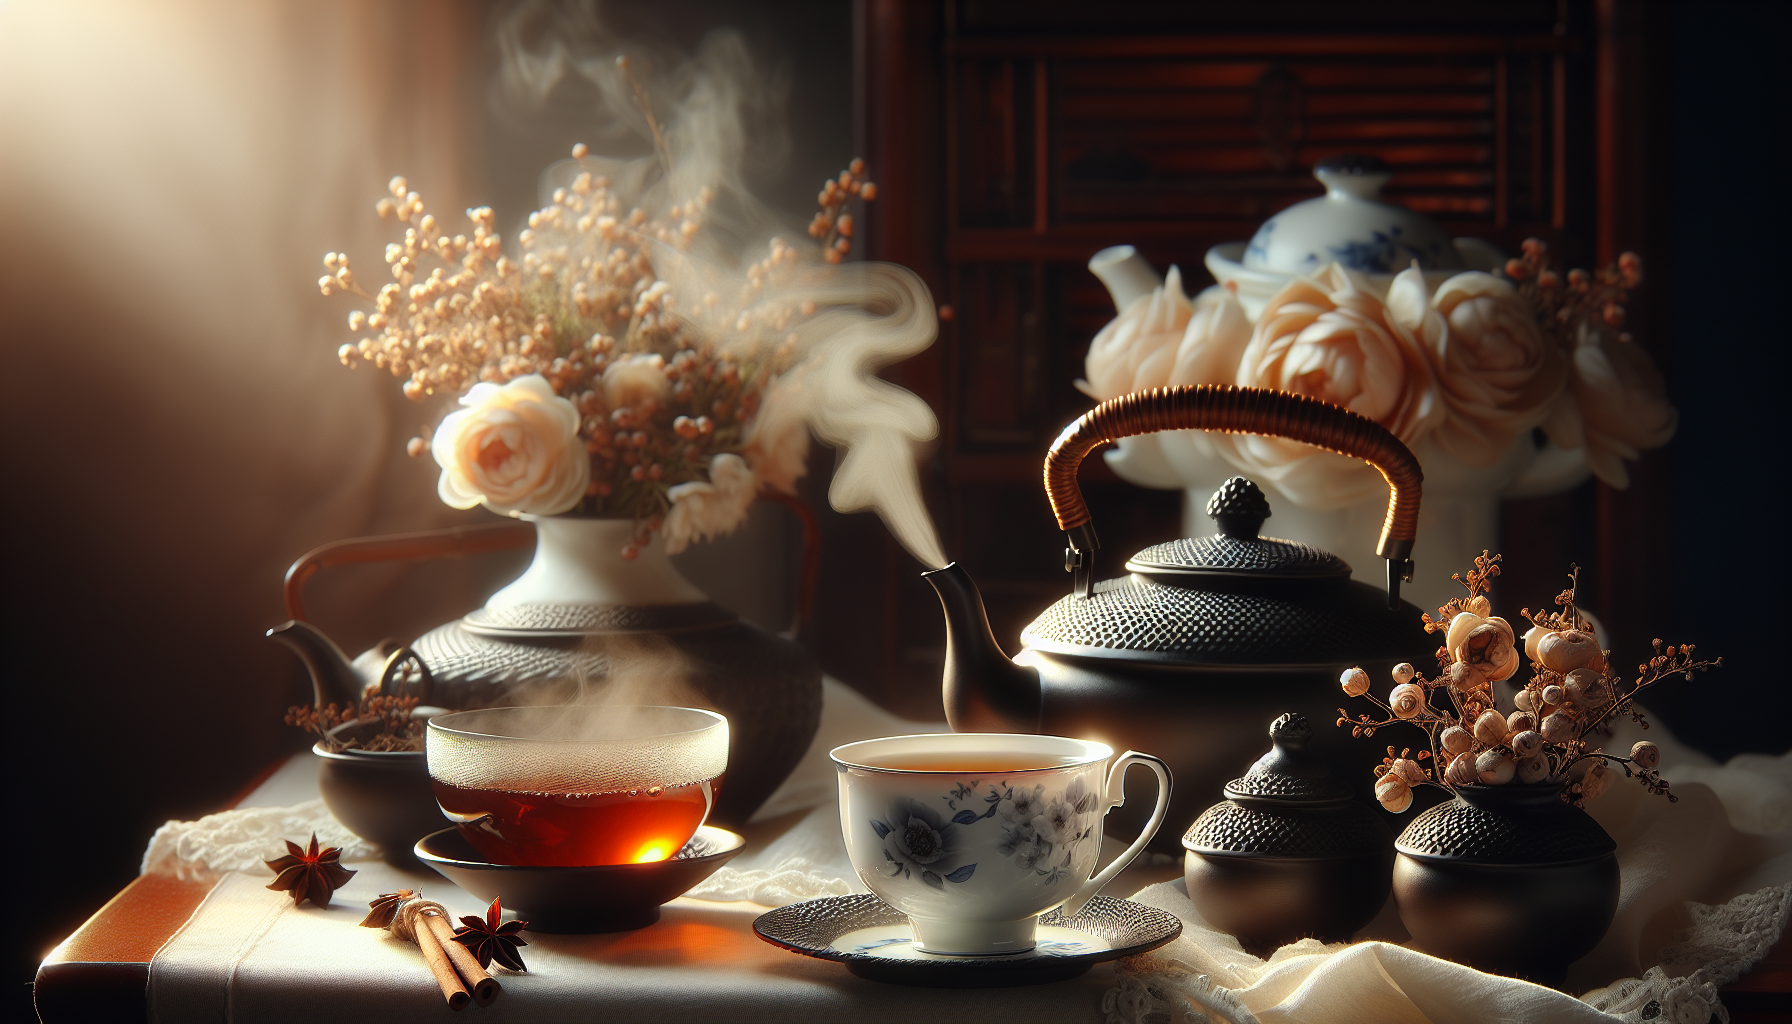 How Long Does Tea Stay Warm In Teapot?